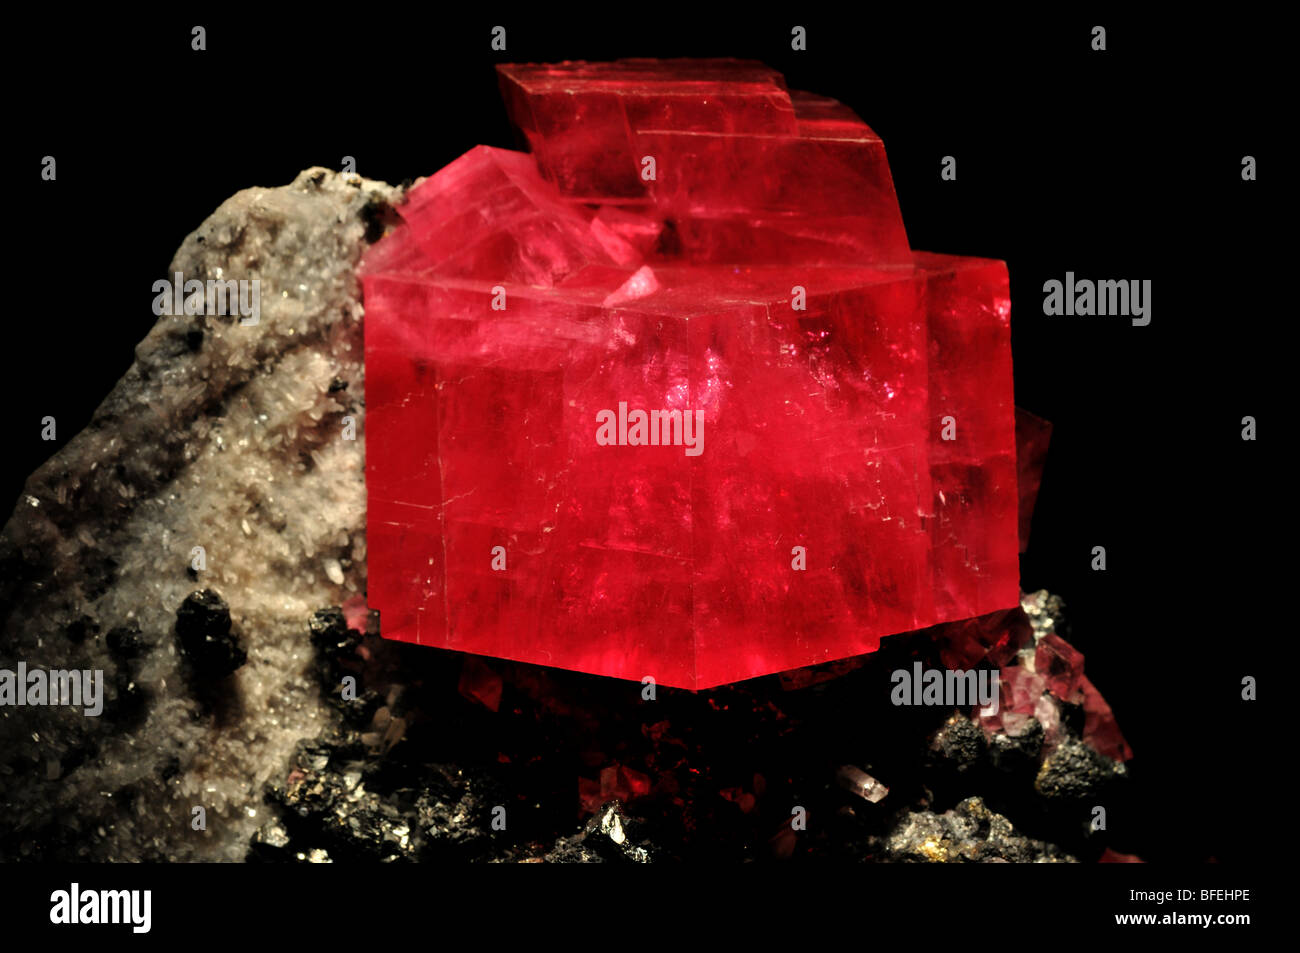 Red rhodochrosite crystals, manganese carbonate (MnCO3). Stock Photo